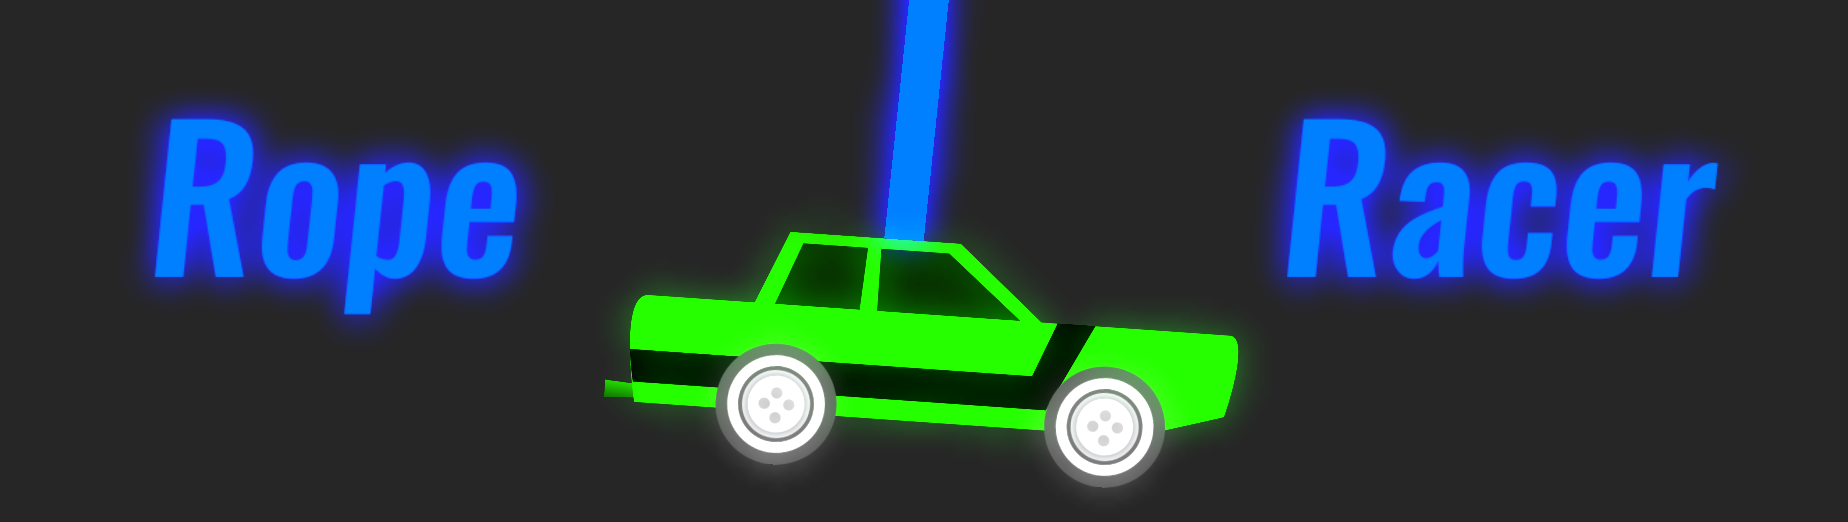 Rope Racer O'Neon